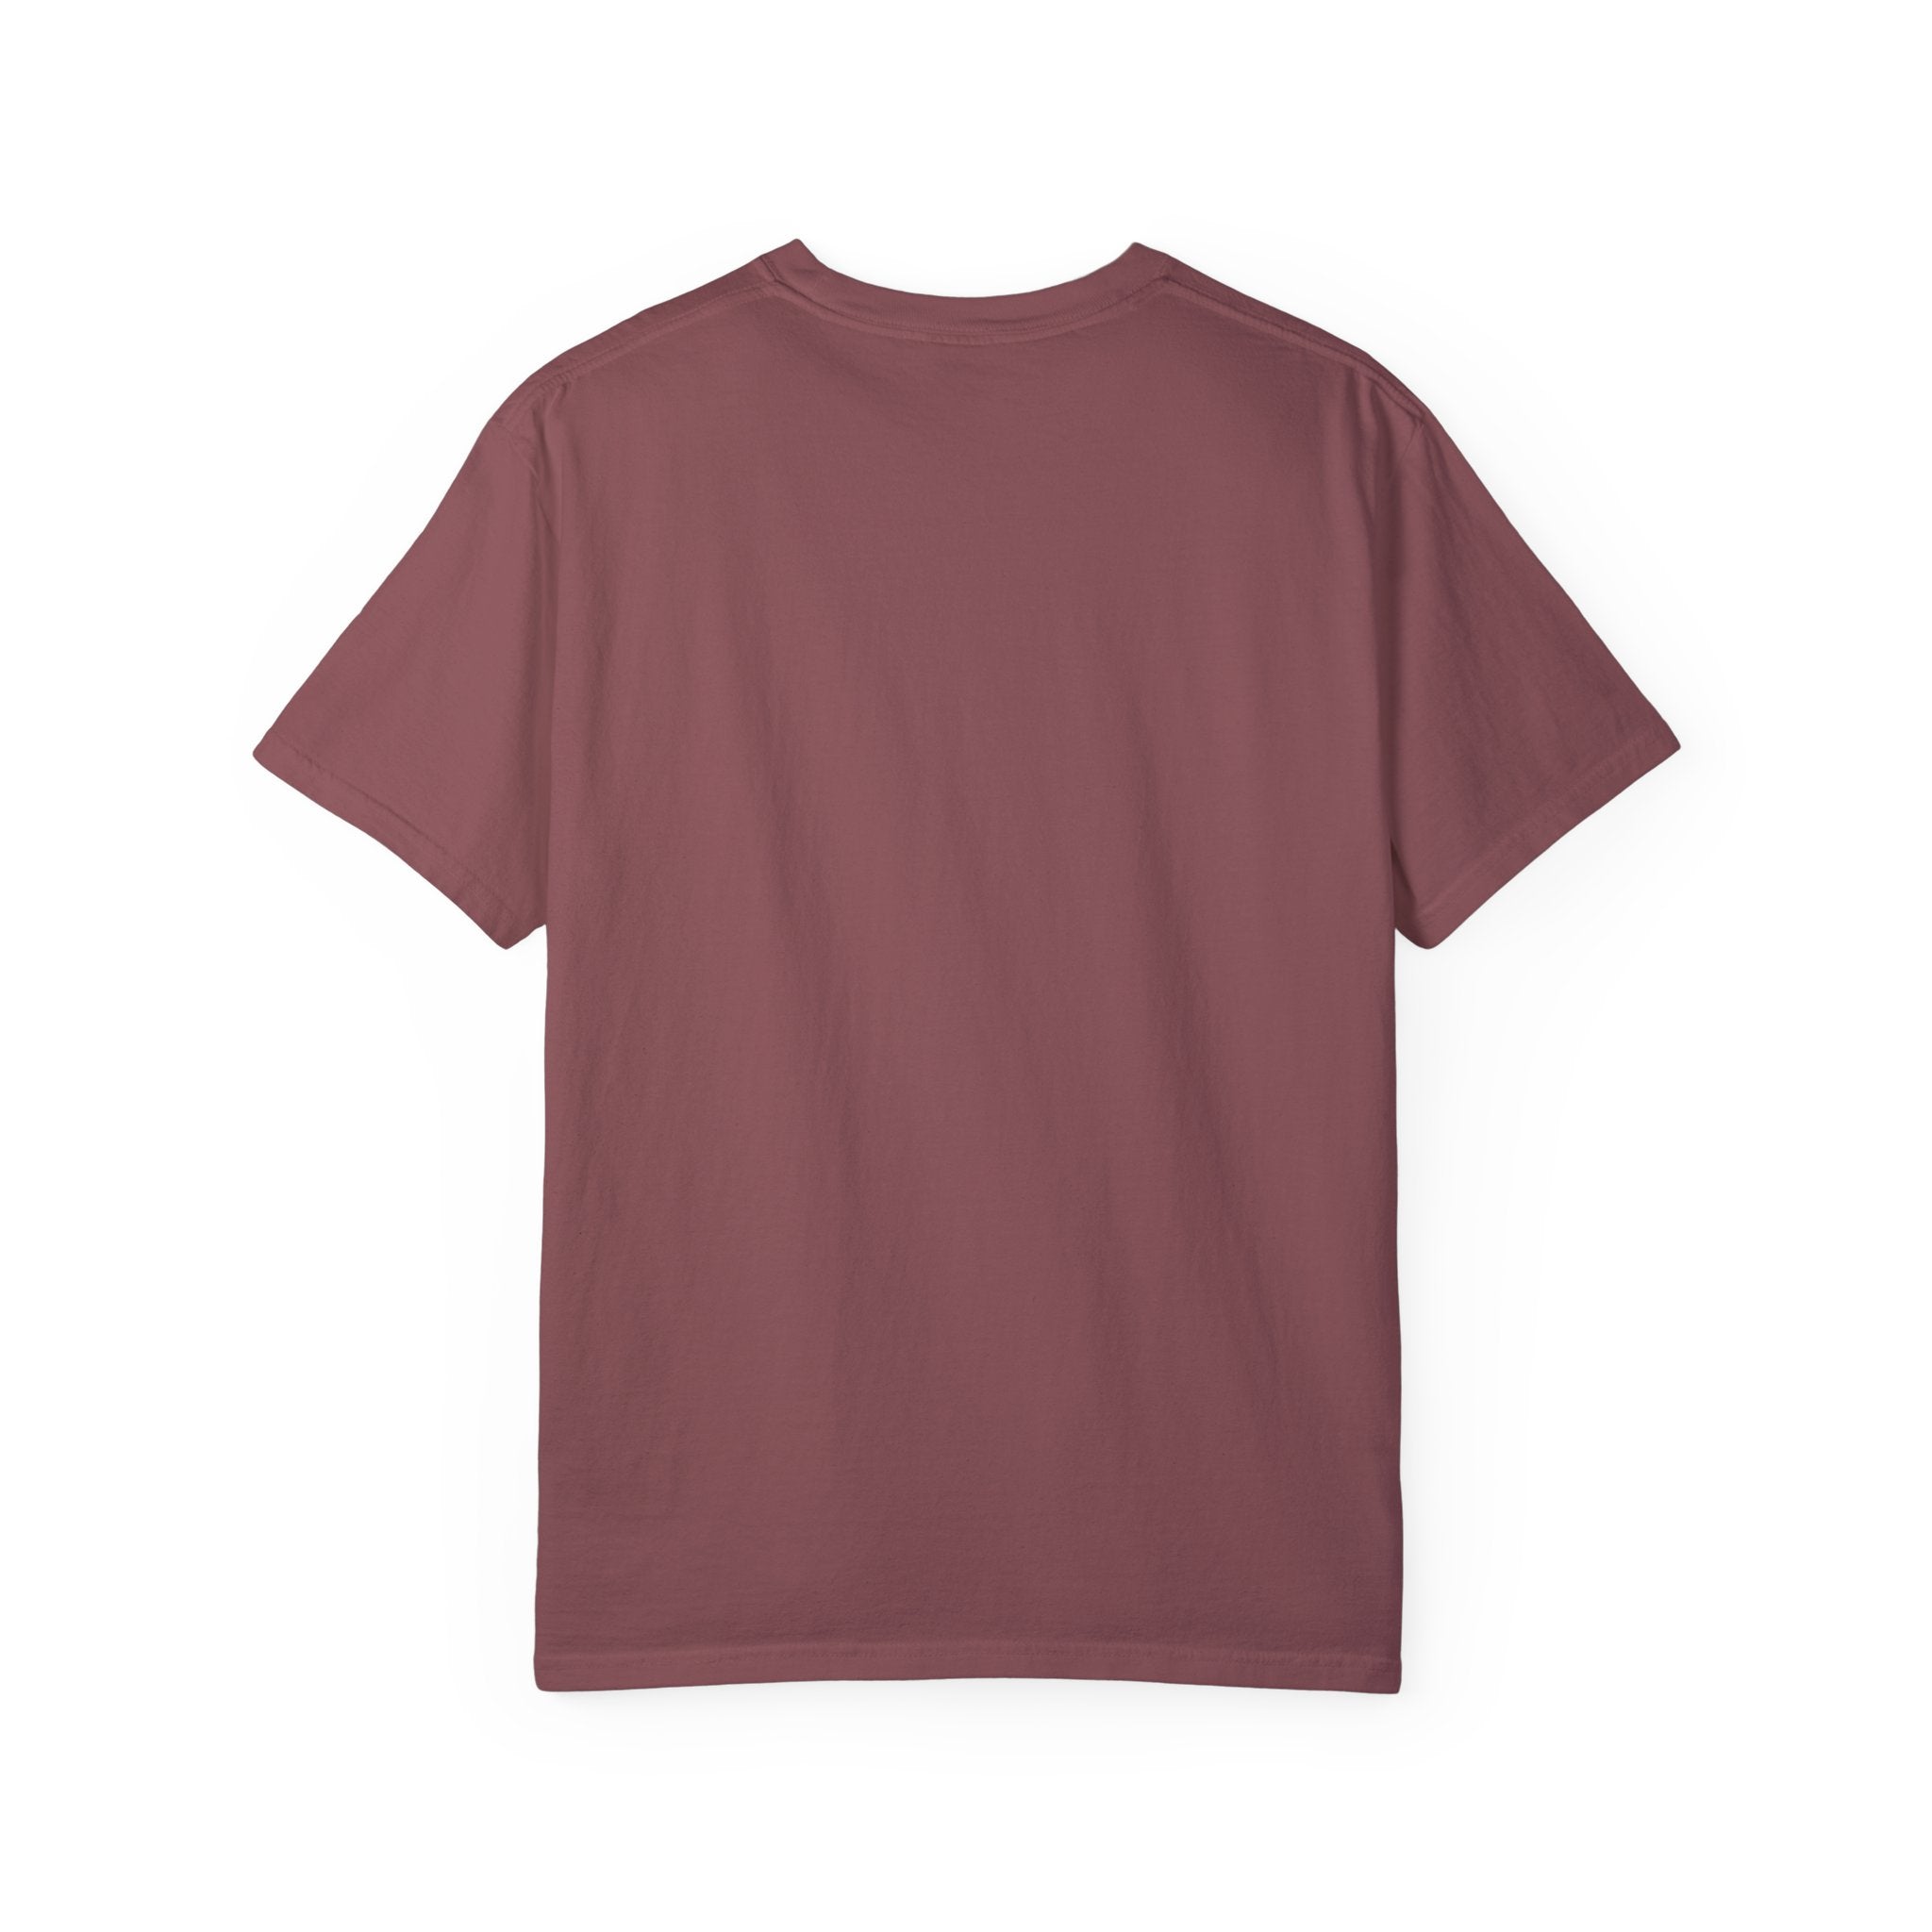 Express Delivery Crew - Unisex Garment-Dyed T-shirt